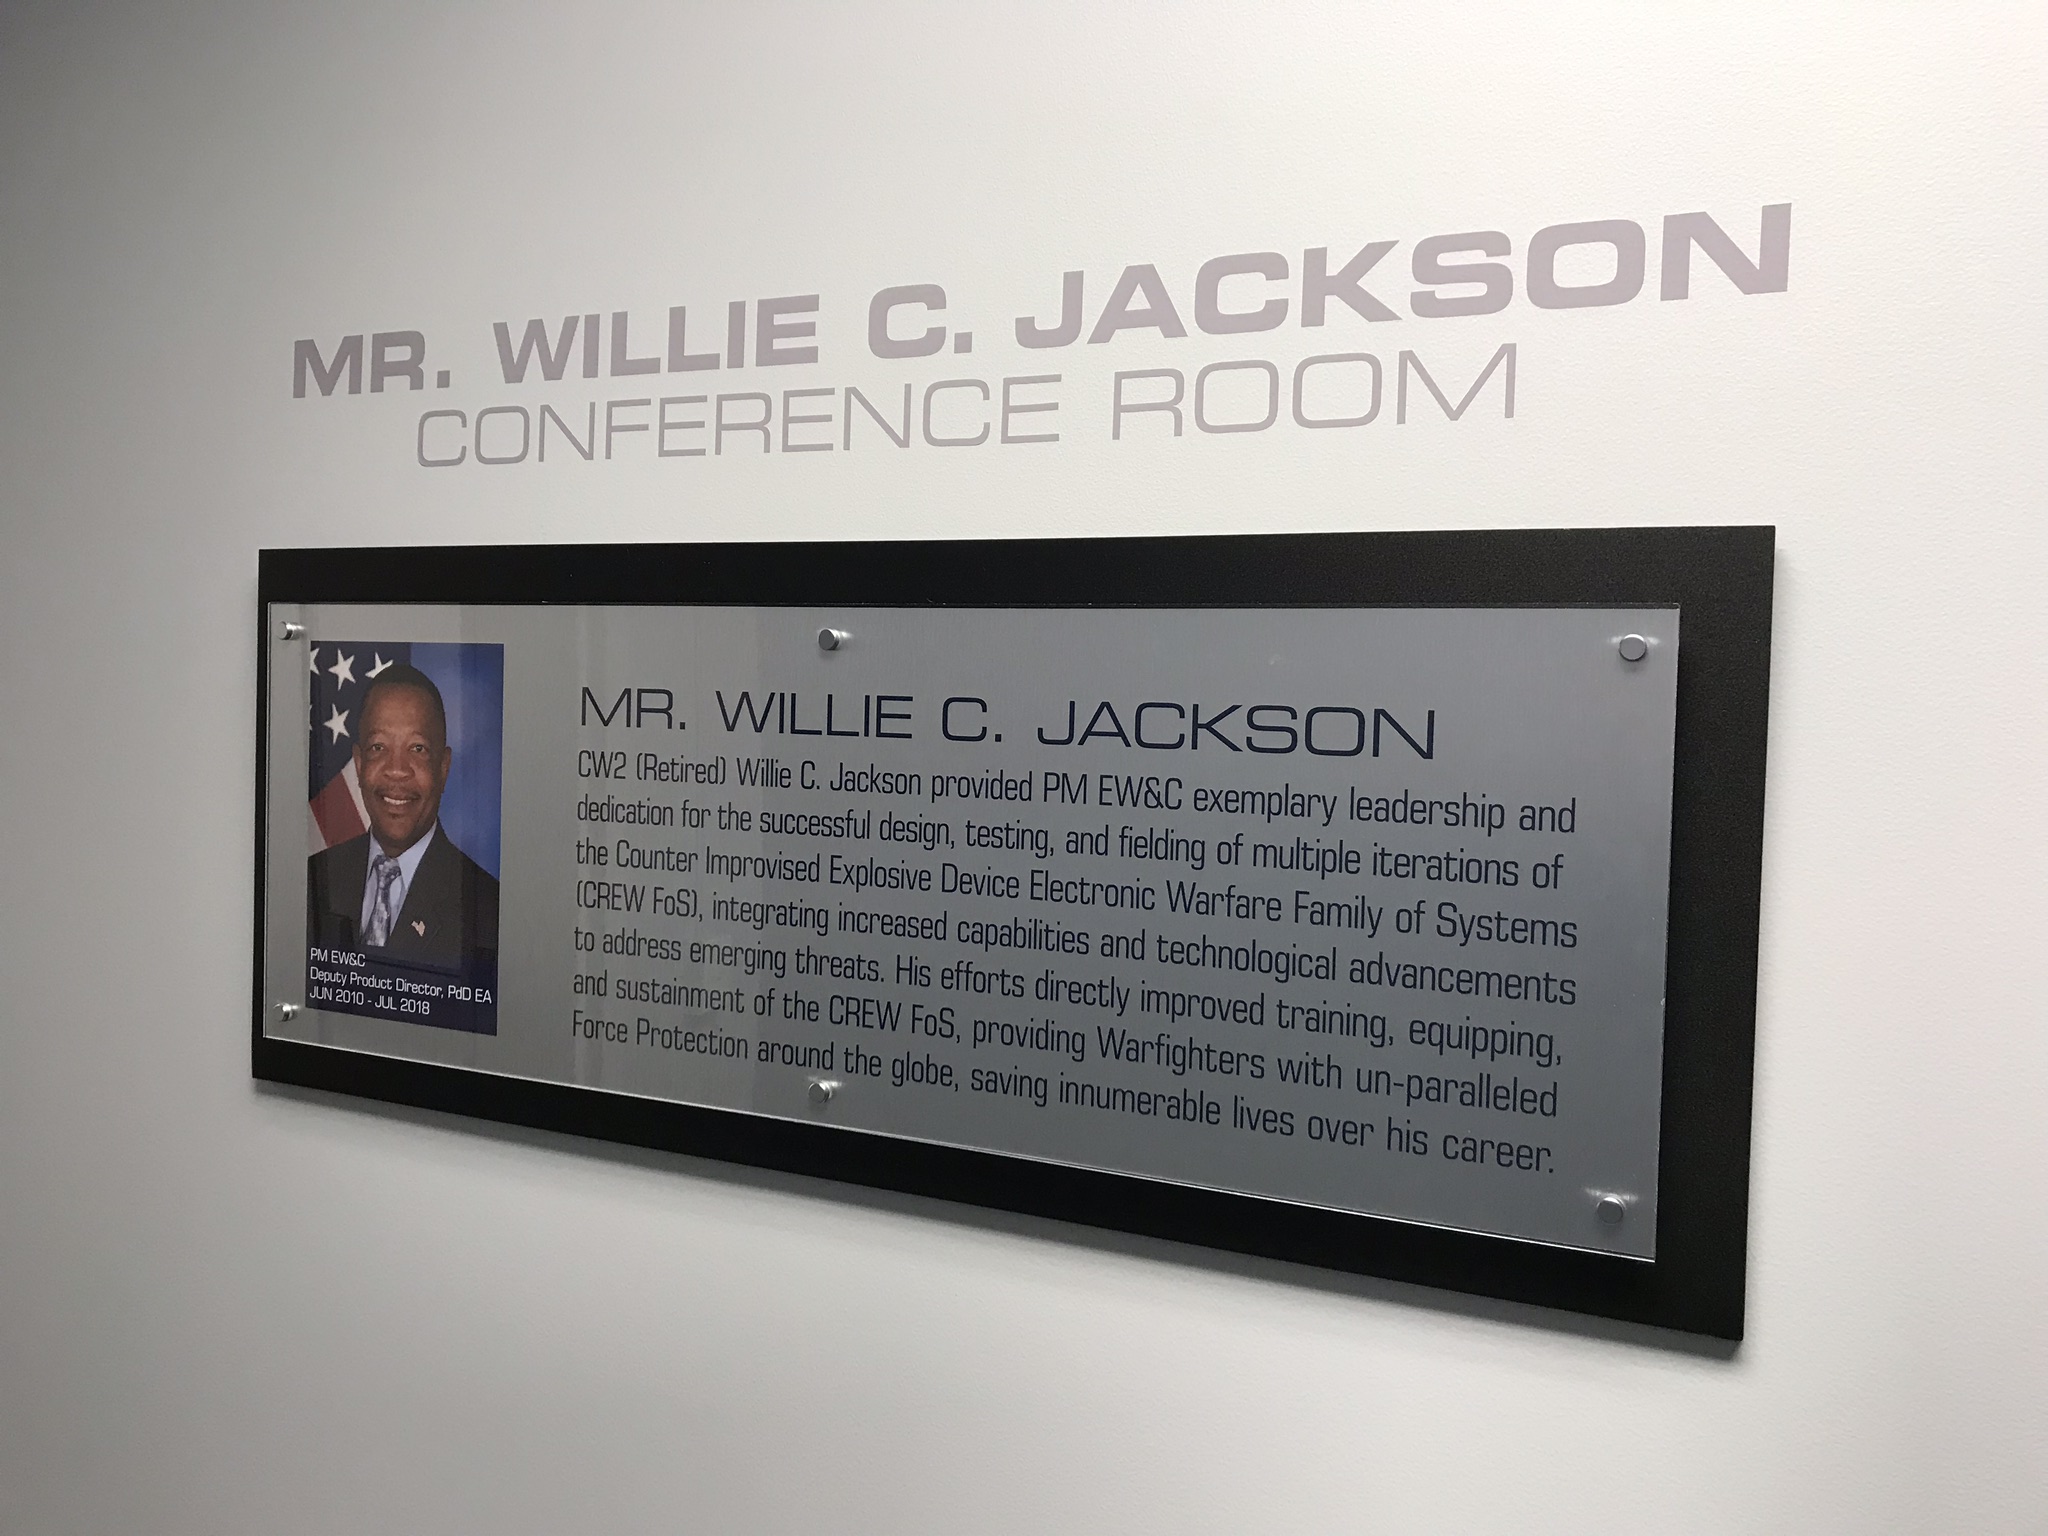 Office graphic of sign for Mr. Willie C. Jackson Conference Room 